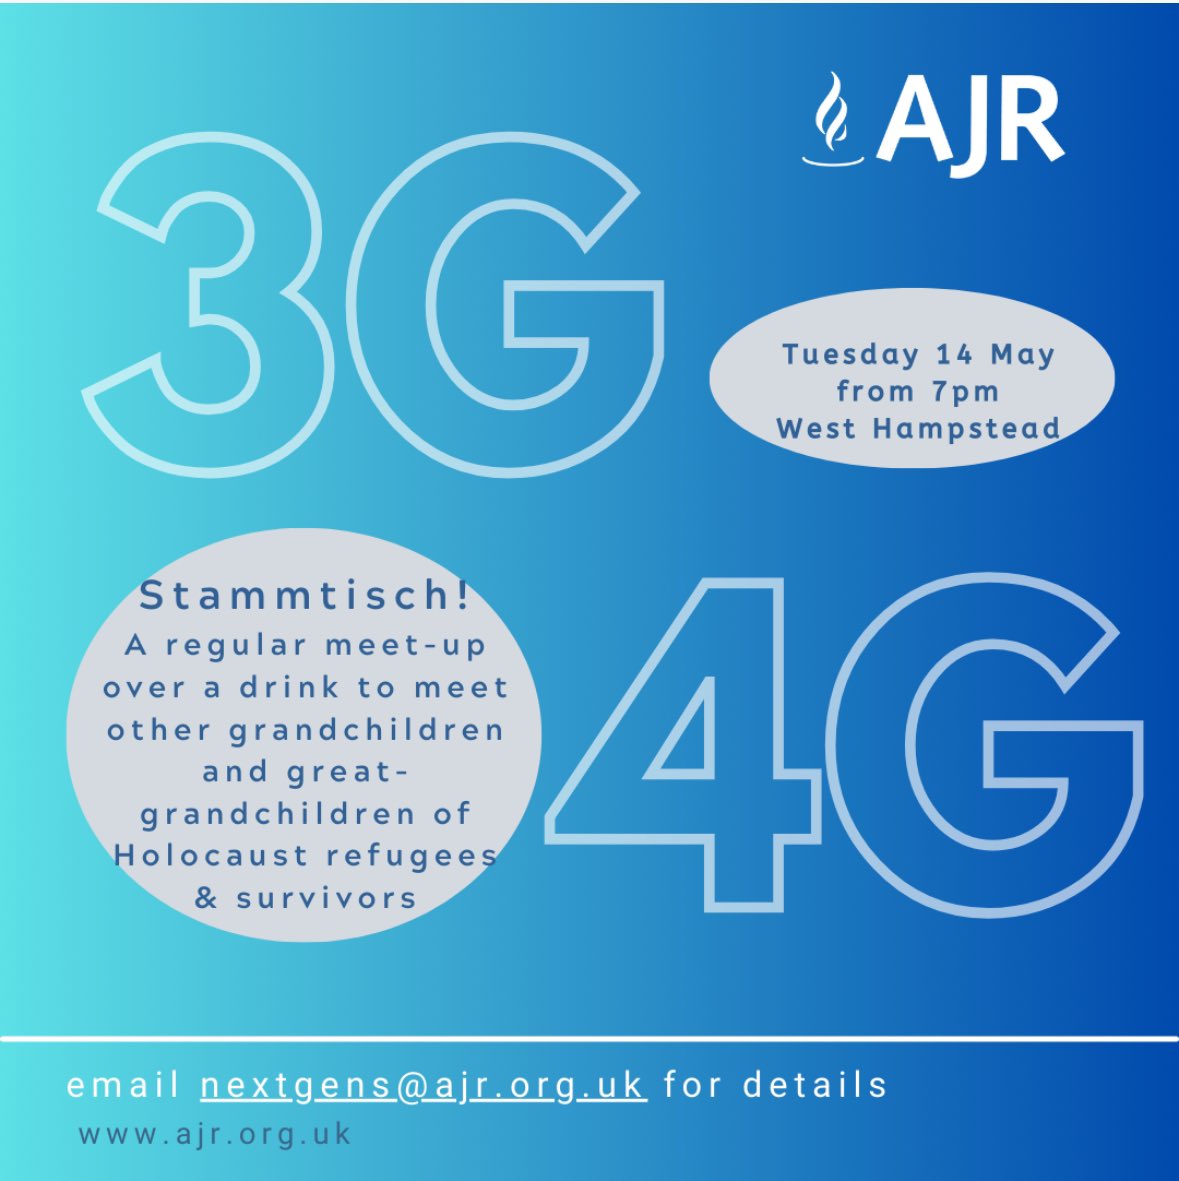 Calling all grandchildren & great-grandchildren of Holocaust survivors & refugees aged 18-40s. Come to our next 3G / 4G ‘Stammtisch’ in a fab venue in NW London. Email nextgens@ajr.org.uk for details 🍹